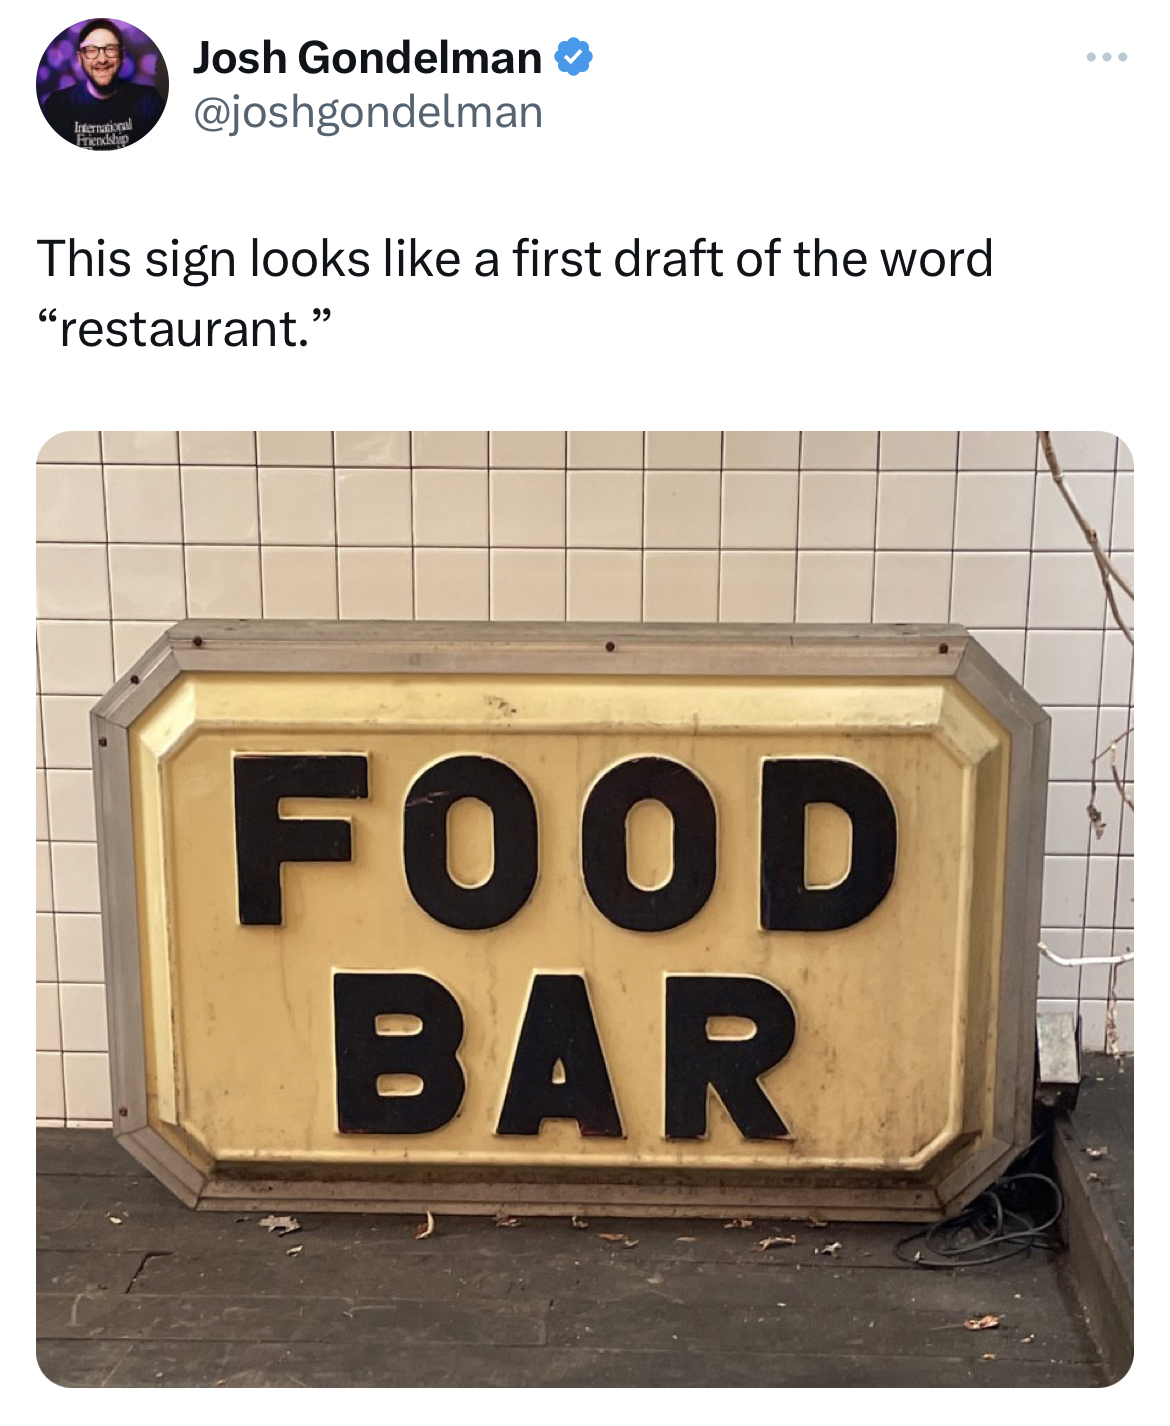 savage tweets - number - Josh Gondelman This sign looks a first draft of the word "restaurant." Food Bar